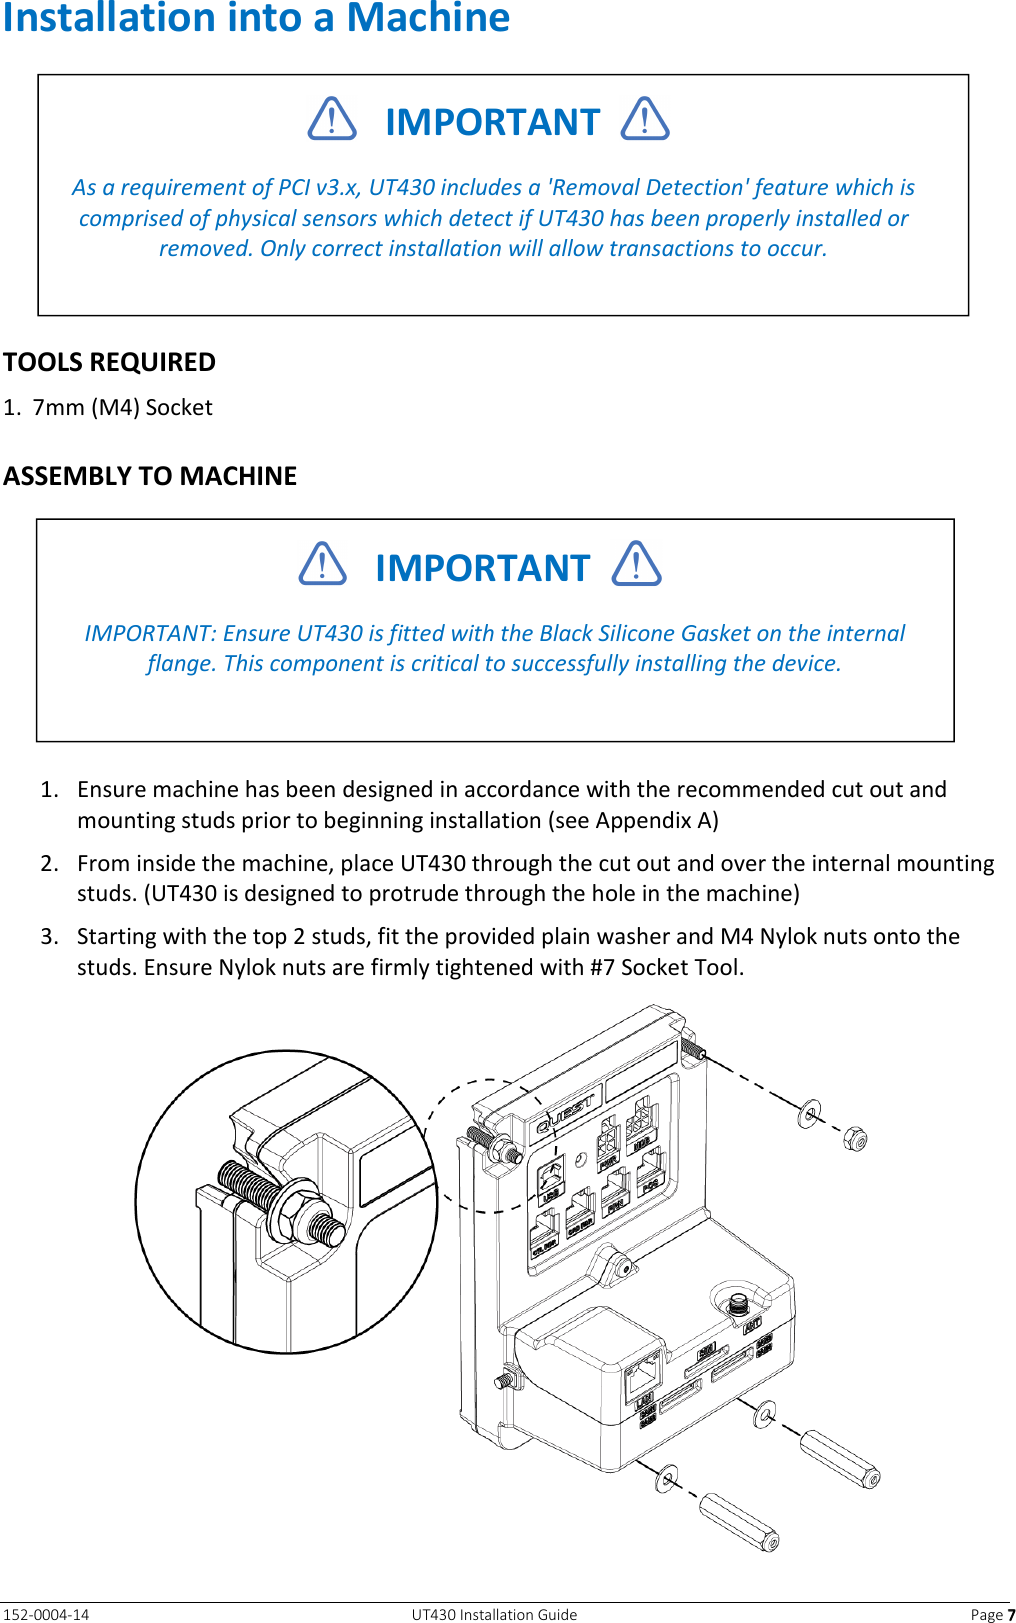   152-0004-14  UT430 Installation Guide  Page 7777 Installation into a Machine   TOOLS REQUIRED 1. 7mm (M4) Socket  ASSEMBLY TO MACHINE   1. Ensure machine has been designed in accordance with the recommended cut out and mounting studs prior to beginning installation (see Appendix A) 2. From inside the machine, place UT430 through the cut out and over the internal mounting studs. (UT430 is designed to protrude through the hole in the machine) 3. Starting with the top 2 studs, fit the provided plain washer and M4 Nylok nuts onto the studs. Ensure Nylok nuts are firmly tightened with #7 Socket Tool.        IMPORTANT    As a requirement of PCI v3.x, UT430 includes a &apos;Removal Detection&apos; feature which is comprised of physical sensors which detect if UT430 has been properly installed or removed. Only correct installation will allow transactions to occur.     IMPORTANT    IMPORTANT: Ensure UT430 is fitted with the Black Silicone Gasket on the internal flange. This component is critical to successfully installing the device. 